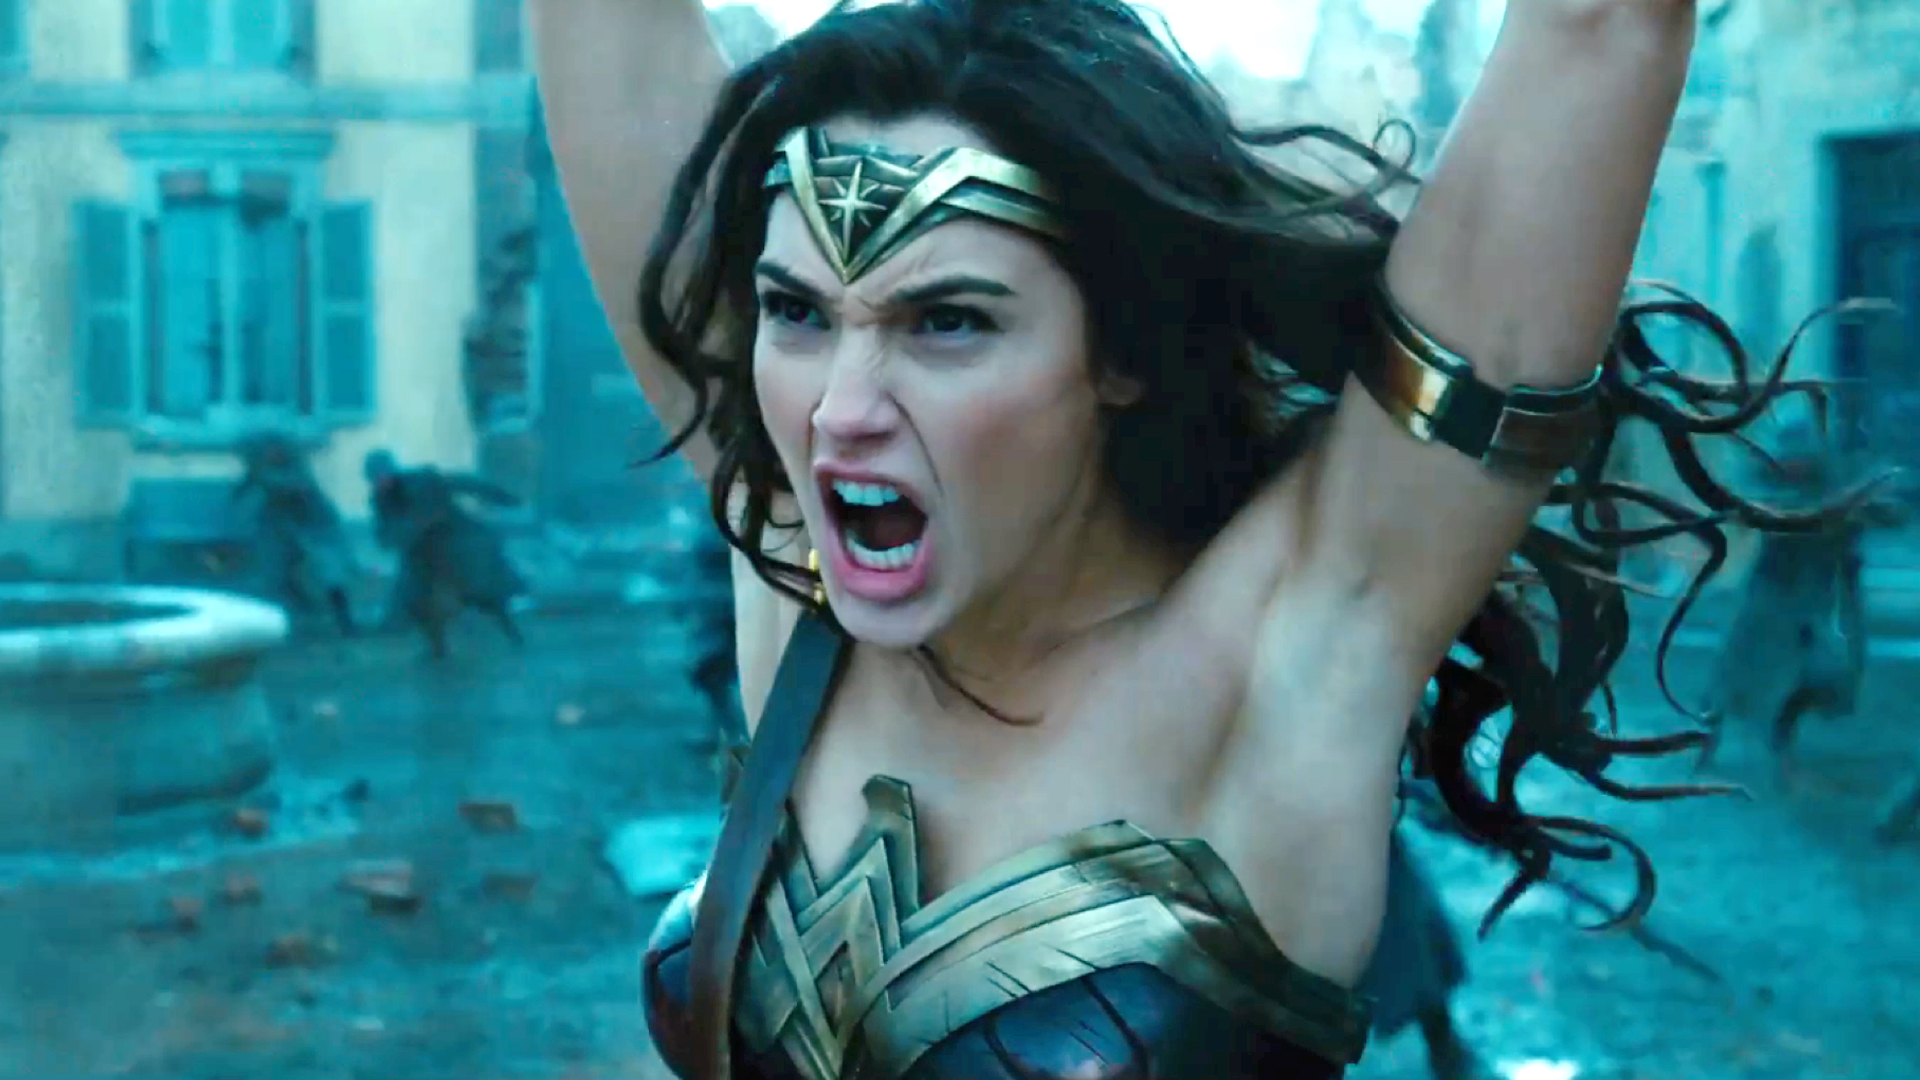 Geekly roundup #5 – ‘wonder woman’ trips up in marketing blitz, bunch of new trailers out!